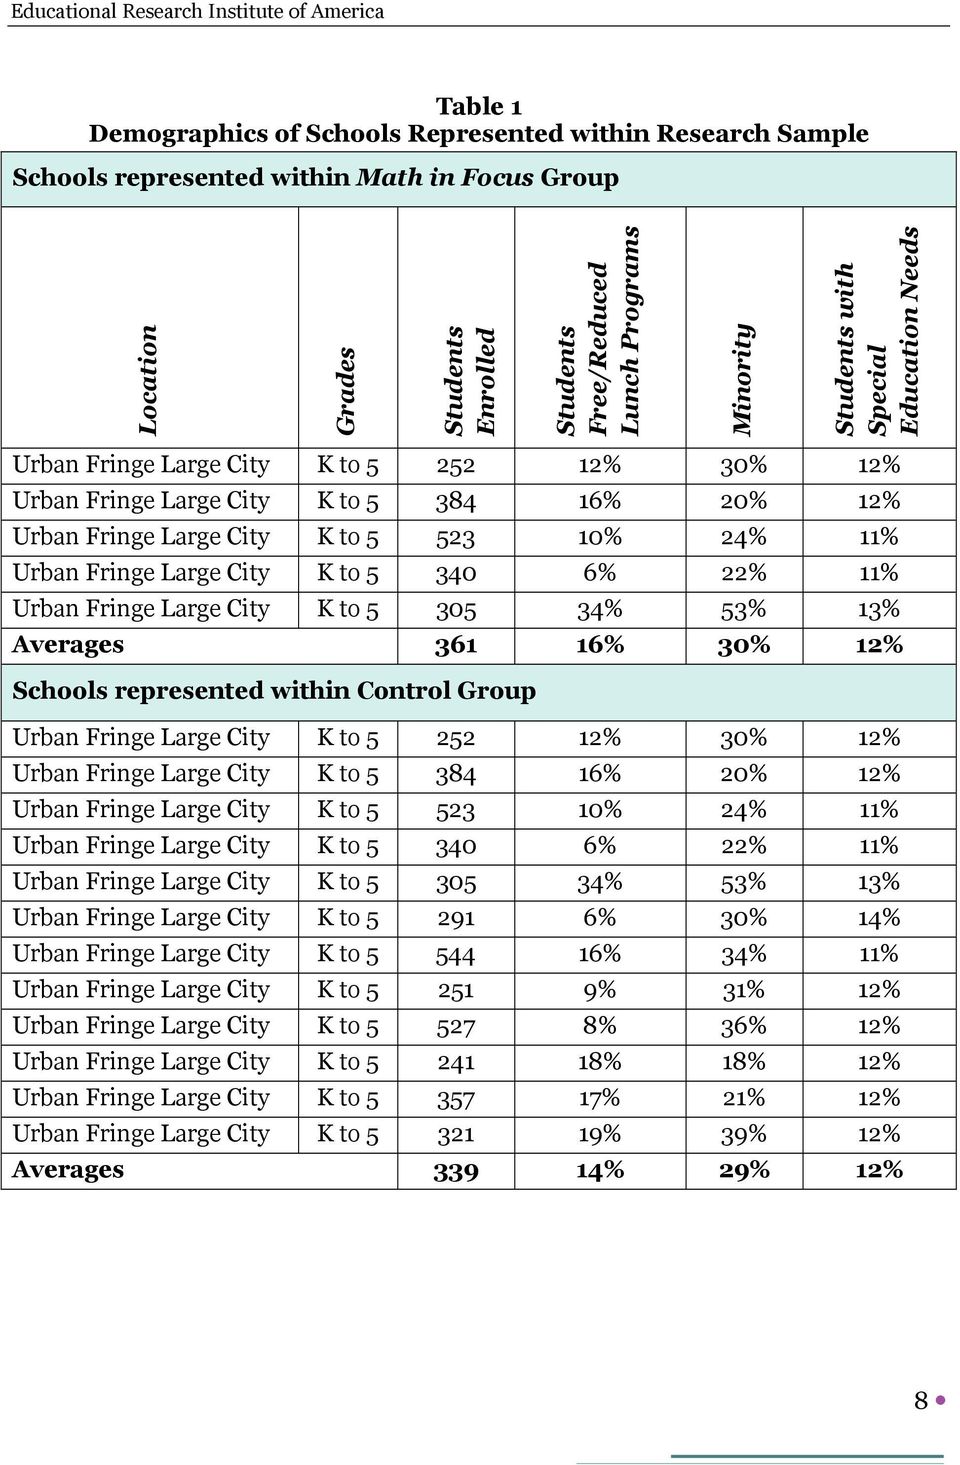 City K to 5 340 6% 22% 11% Urban Fringe Large City K to 5 305 34% 53% 13% Averages 361 16% 30% 12% Schools represented within Control Group Urban Fringe Large City K to 5 252 12% 30% 12% Urban Fringe